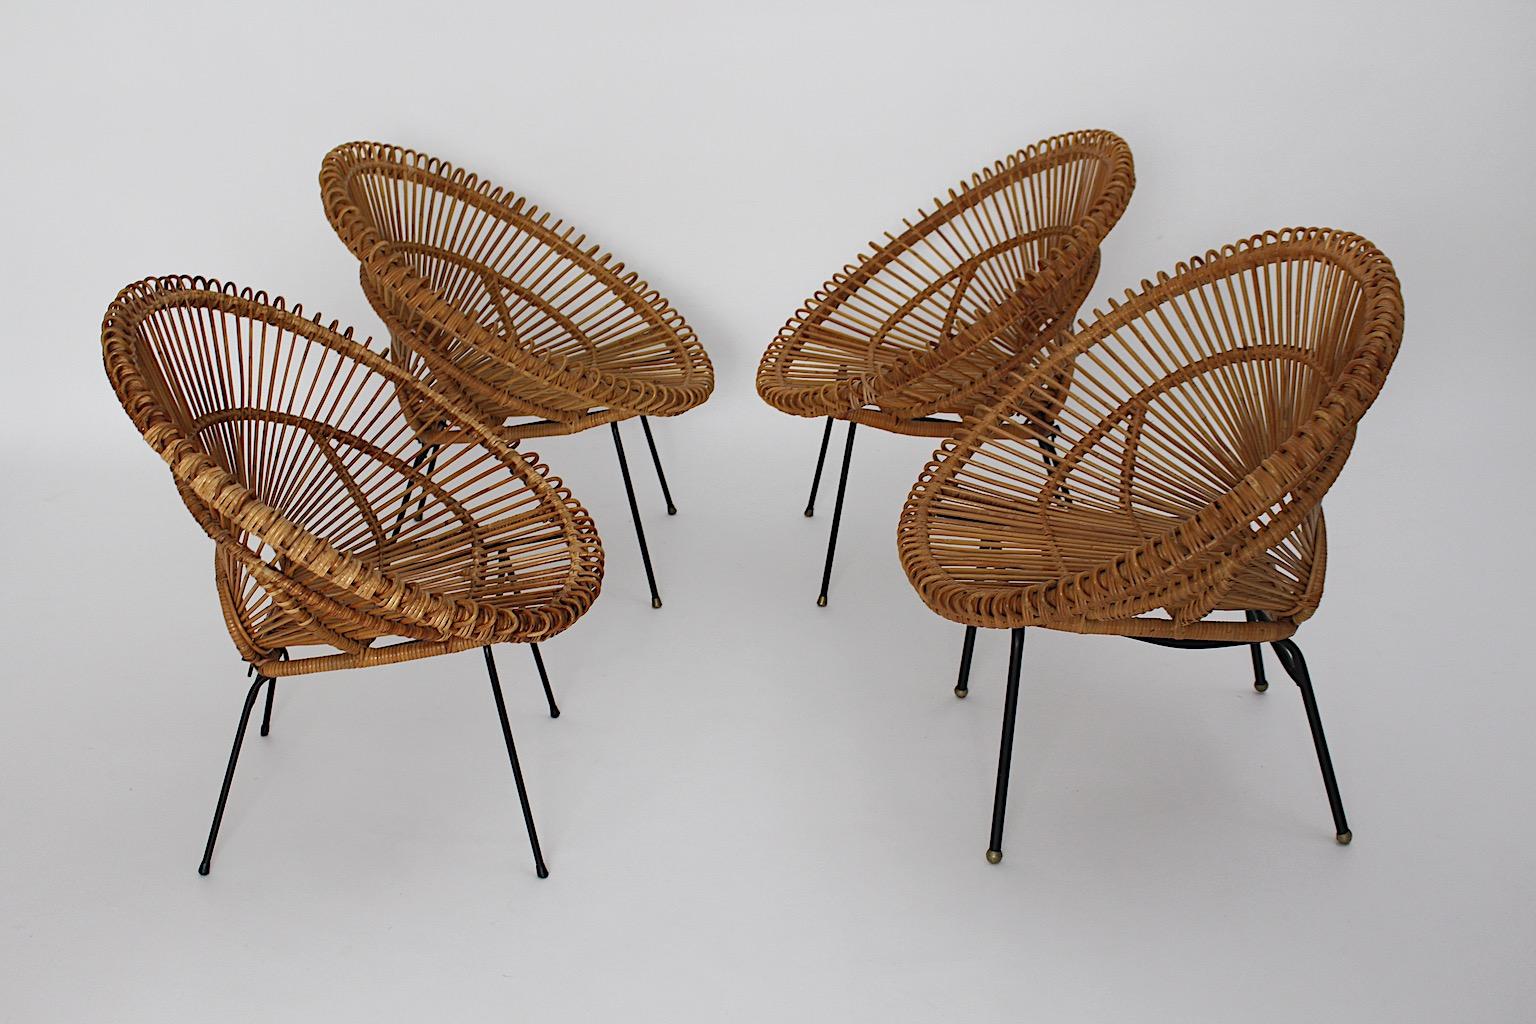 Mid-Century Modern Riviera style vintage patio set of four handmade lounge chairs from rattan
attributed to Janine Abraham and Dirk Jan Rol c 1960 France.
The handmade rattan lounge chairs show black lacquered metal base with rattan seat